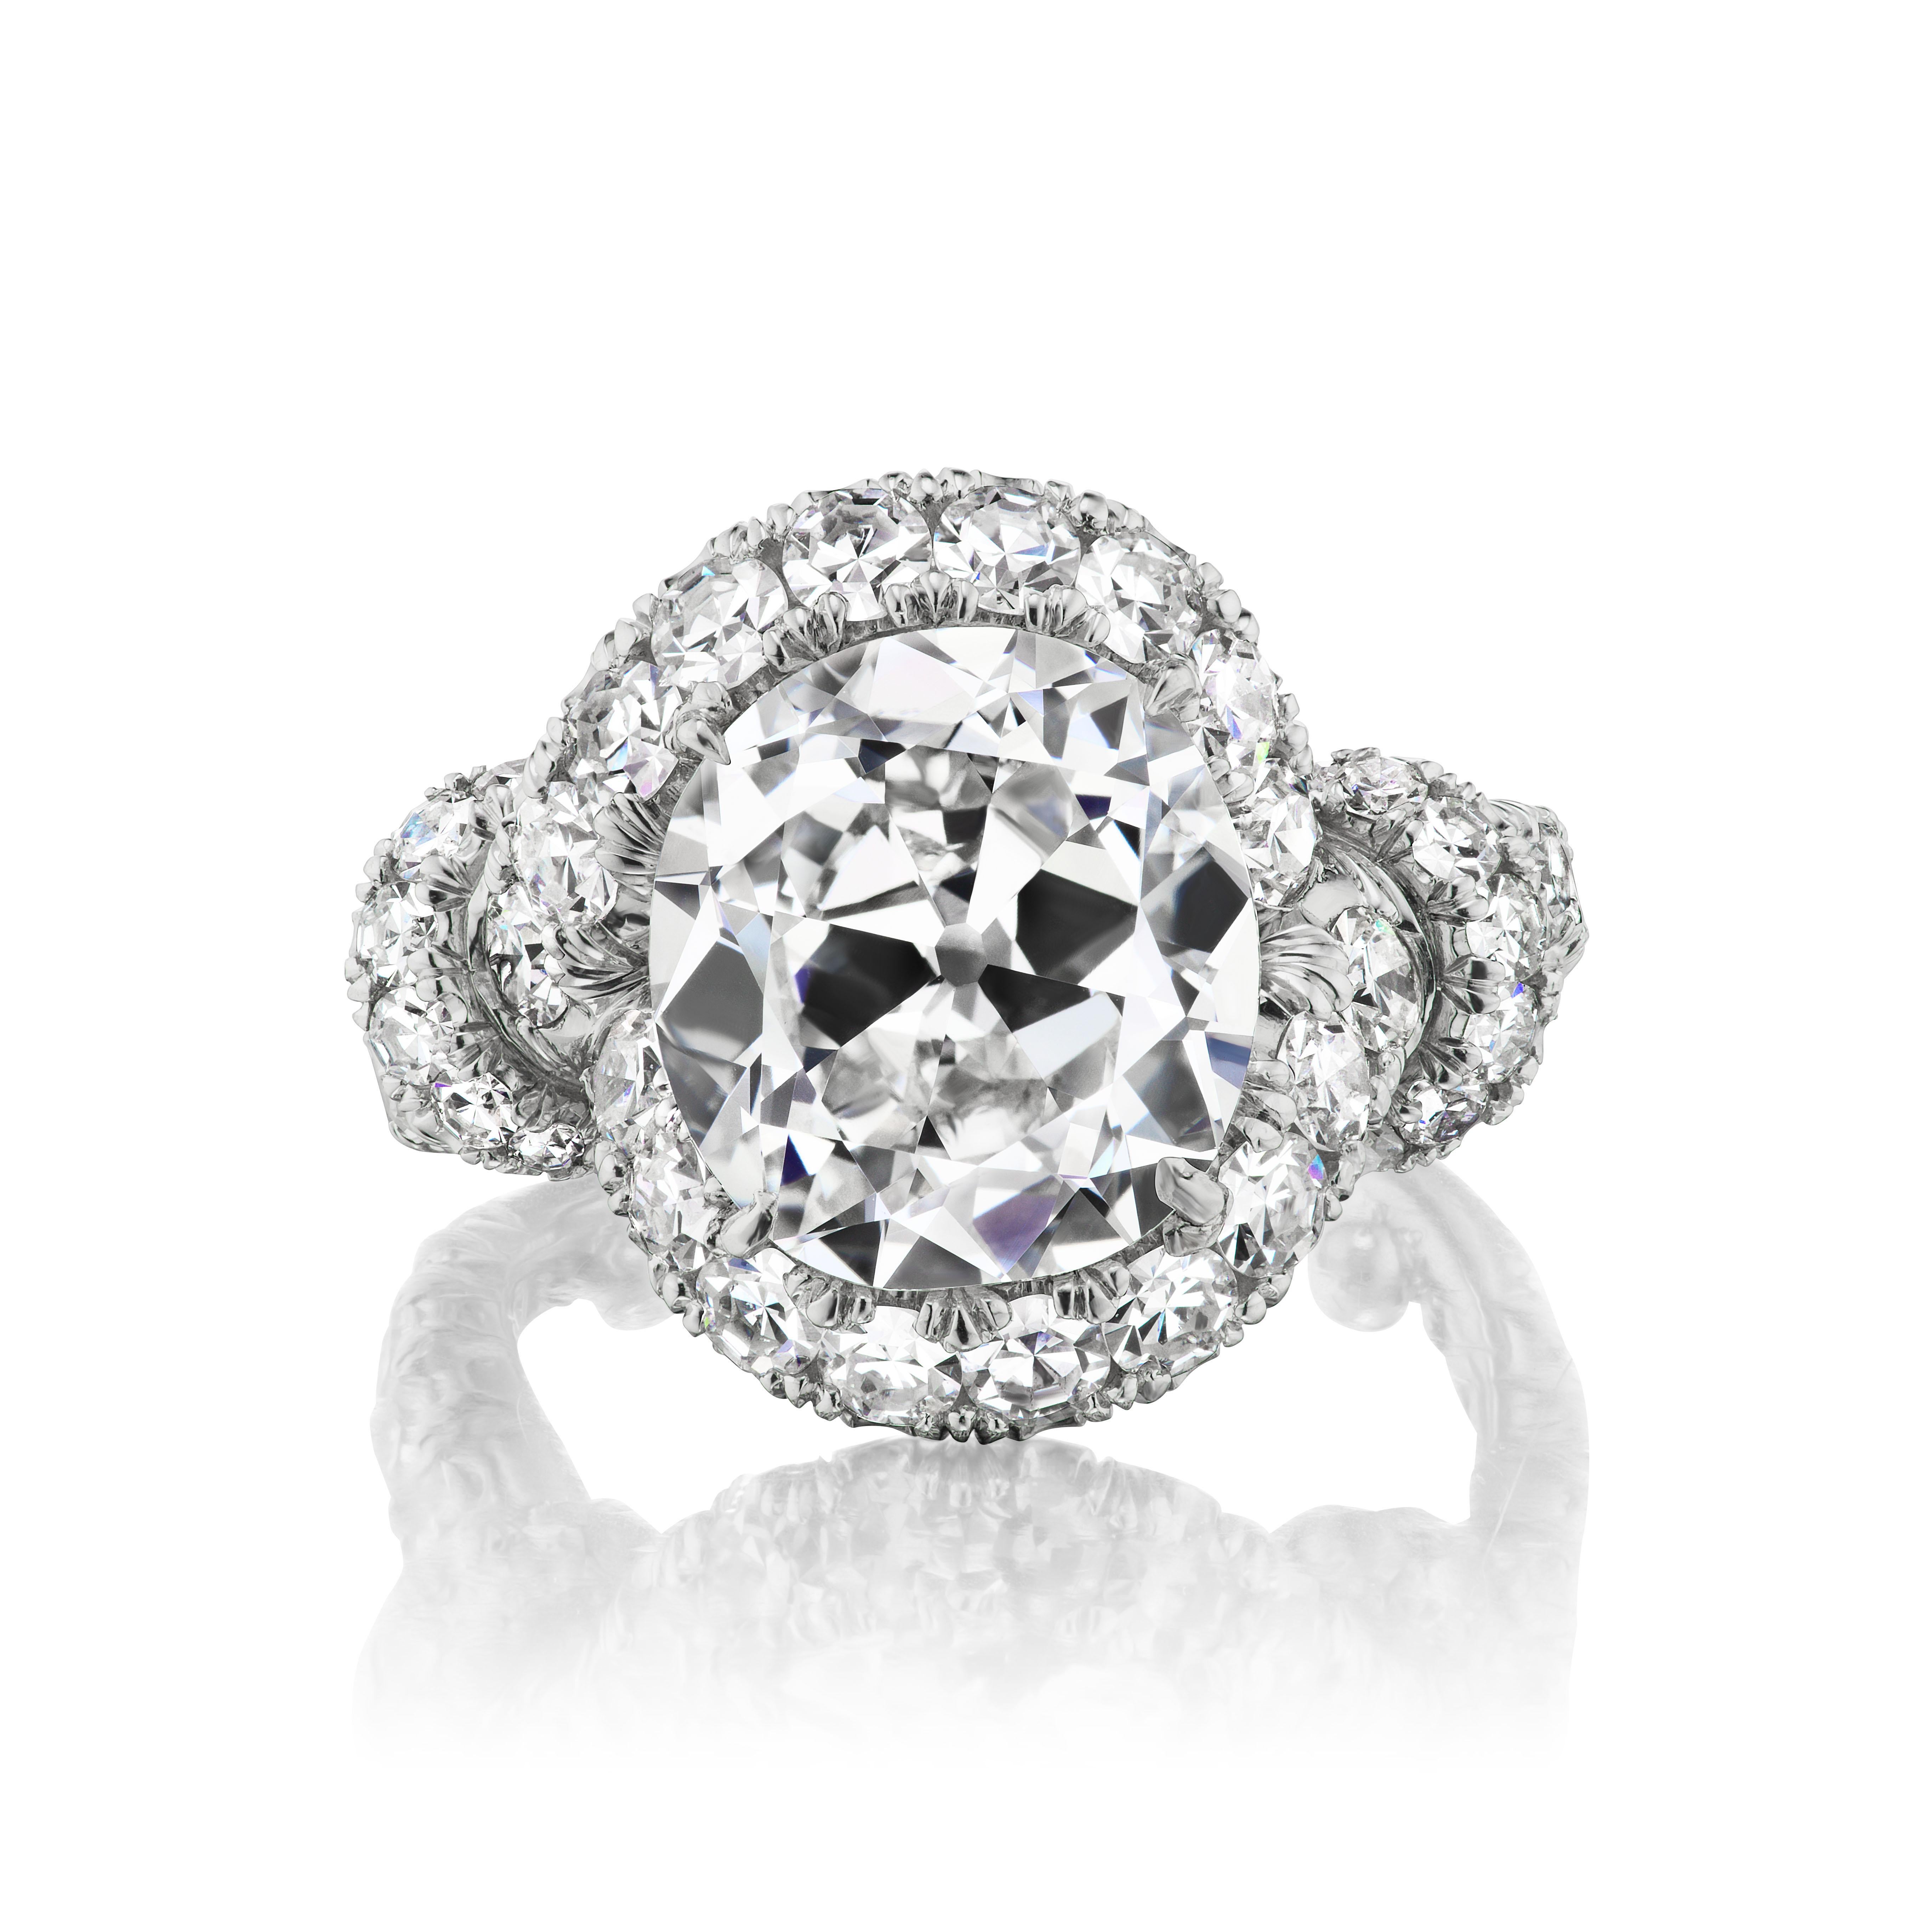 The rare and charming 5.06 carat antique cushion-cut diamond is elegantly presented in a delightful diamond and platinum ring made up of 48 single-cut diamonds weighing approximately 1.94 carats. This ring is defined by its knot feature at the